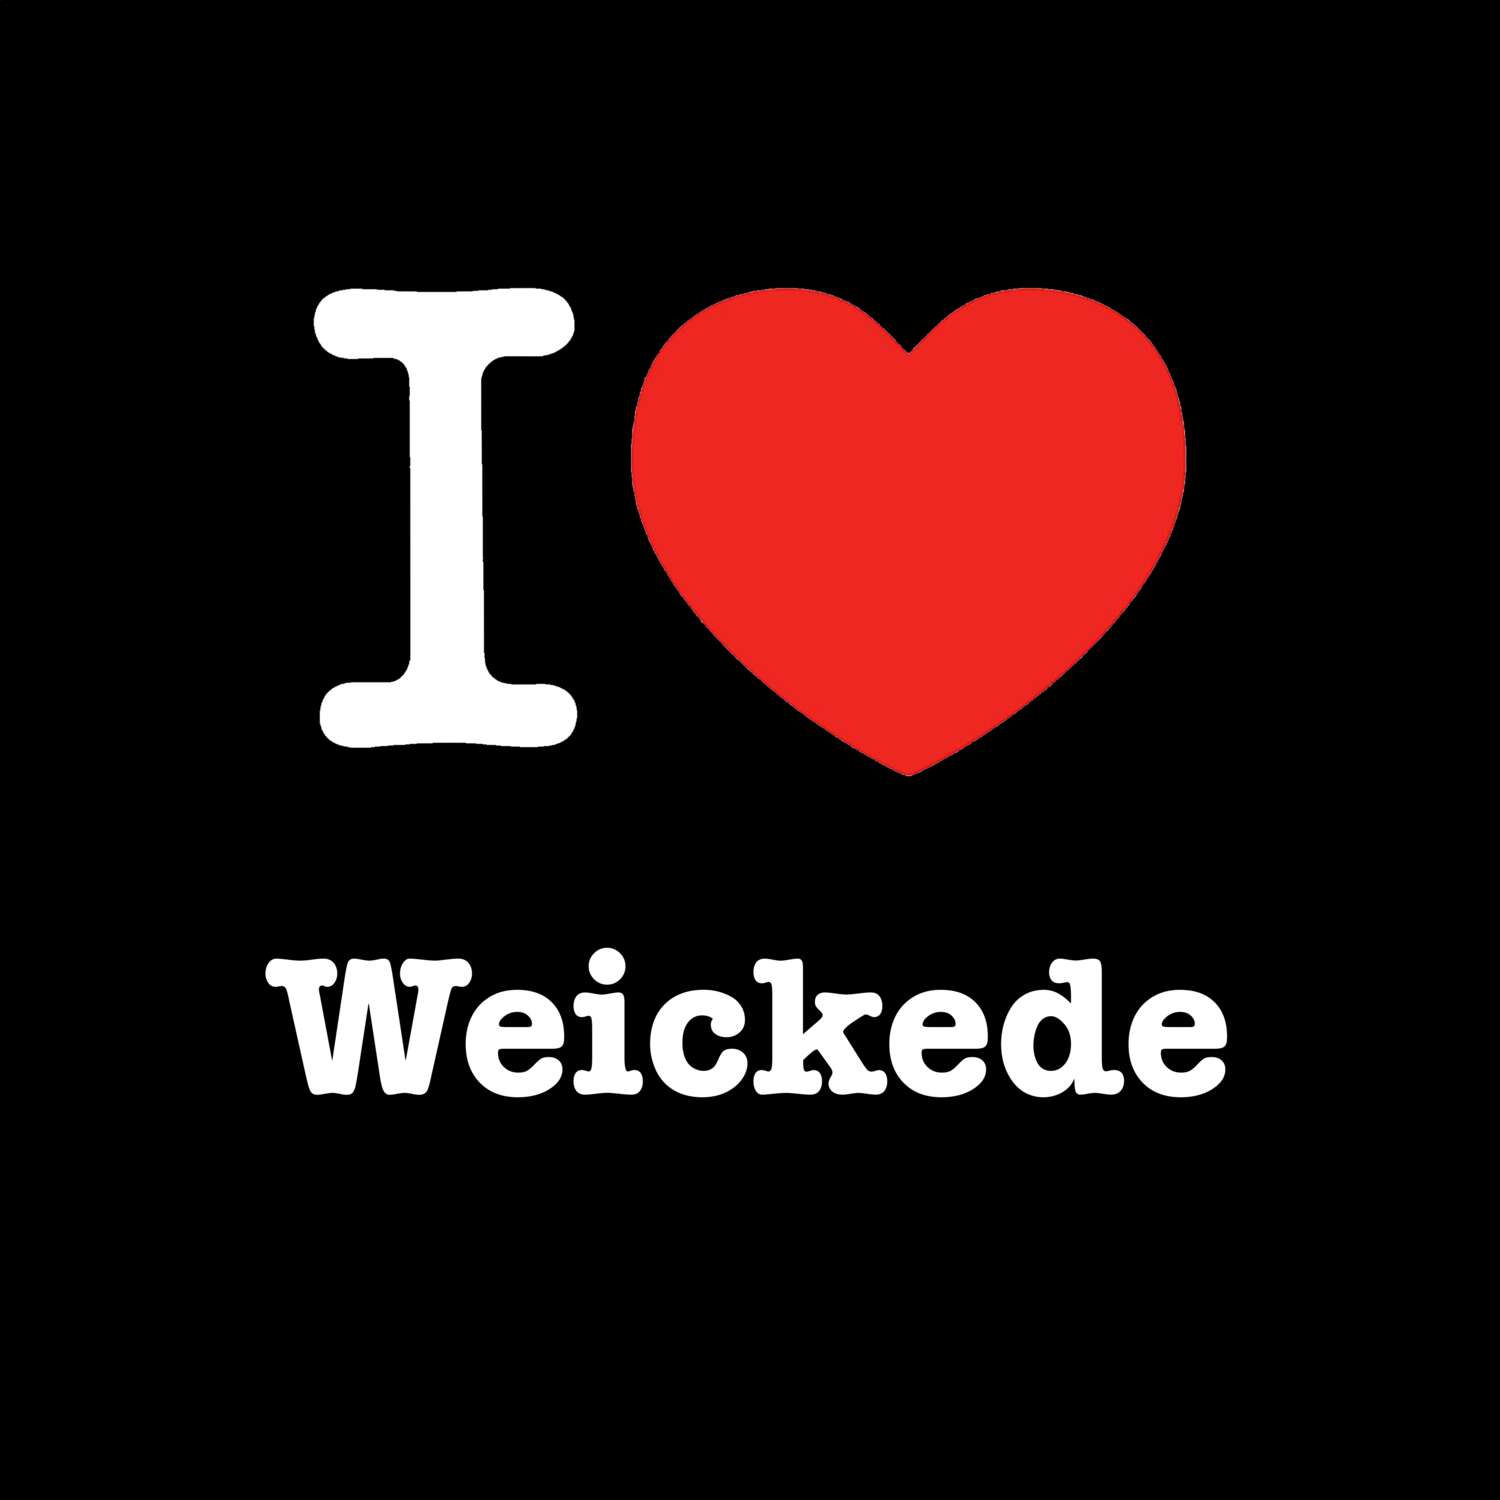 Weickede T-Shirt »I love«